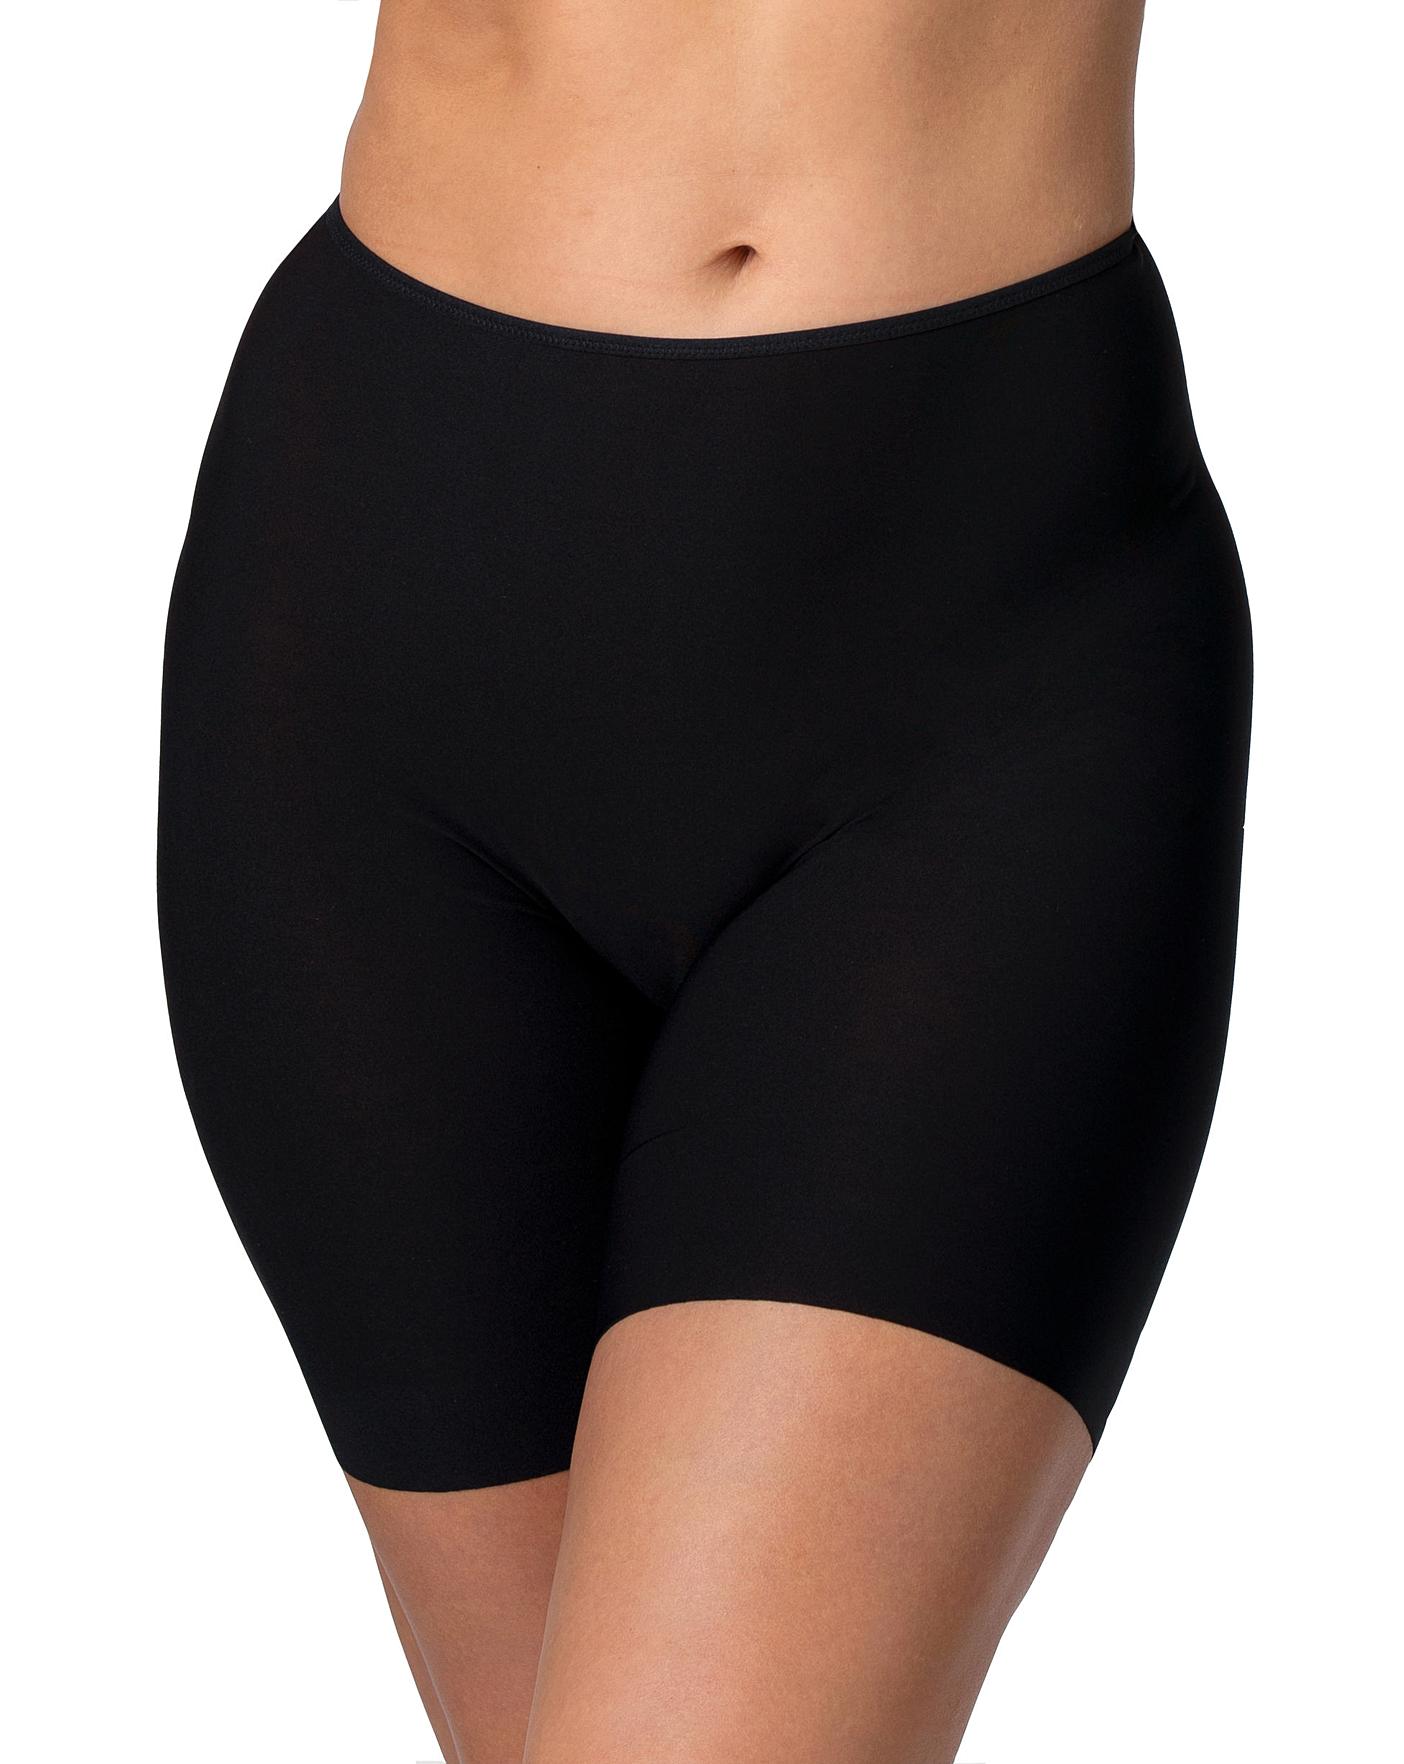 Shop for Miss Mary of Sweden, Black, Shapewear